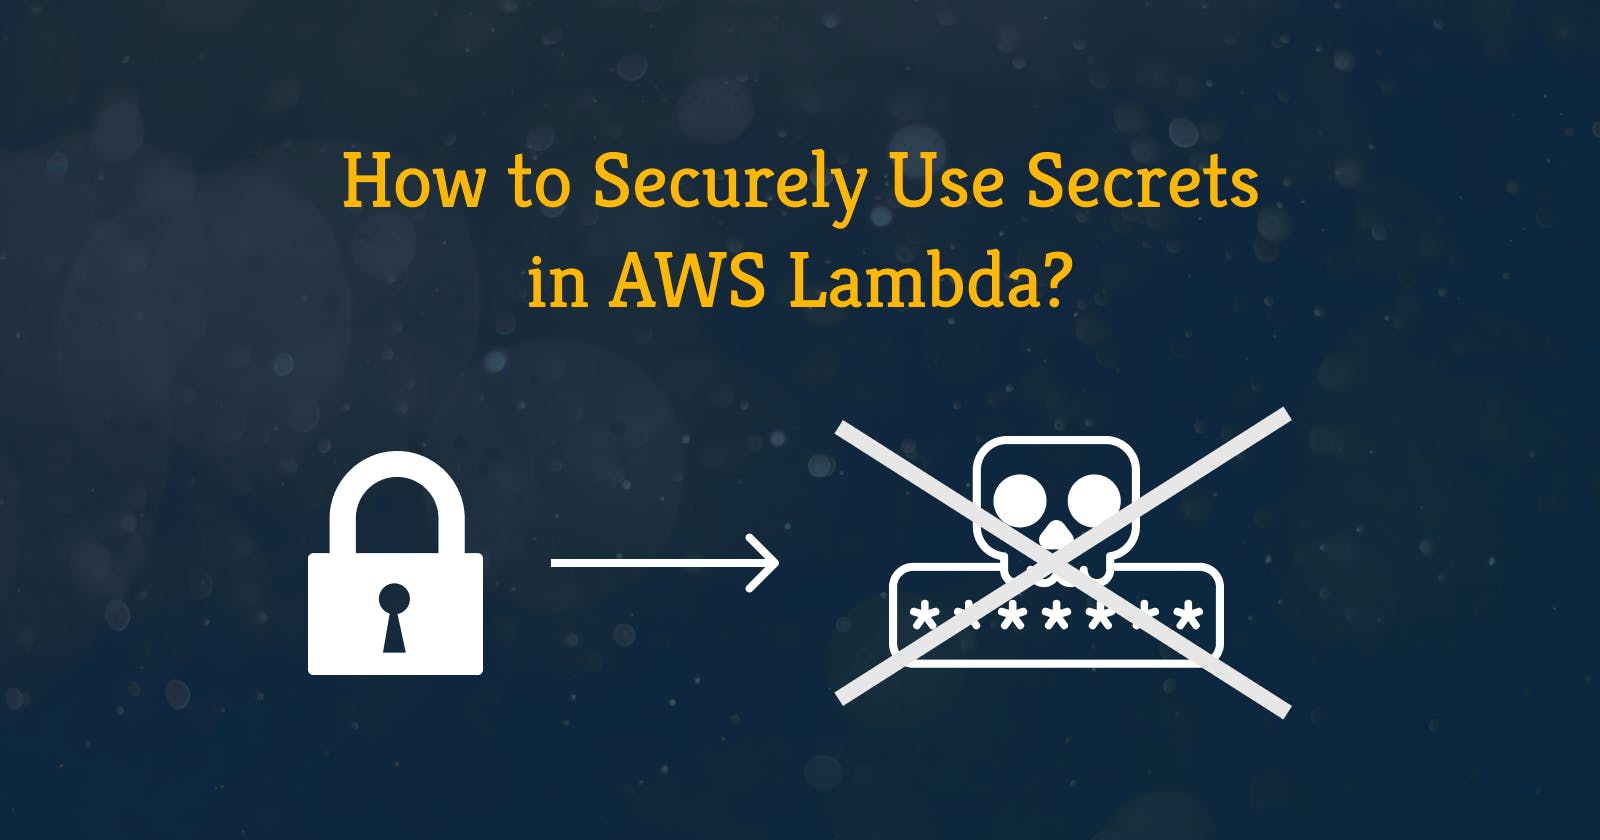 How to Securely Use Secrets in AWS Lambda?